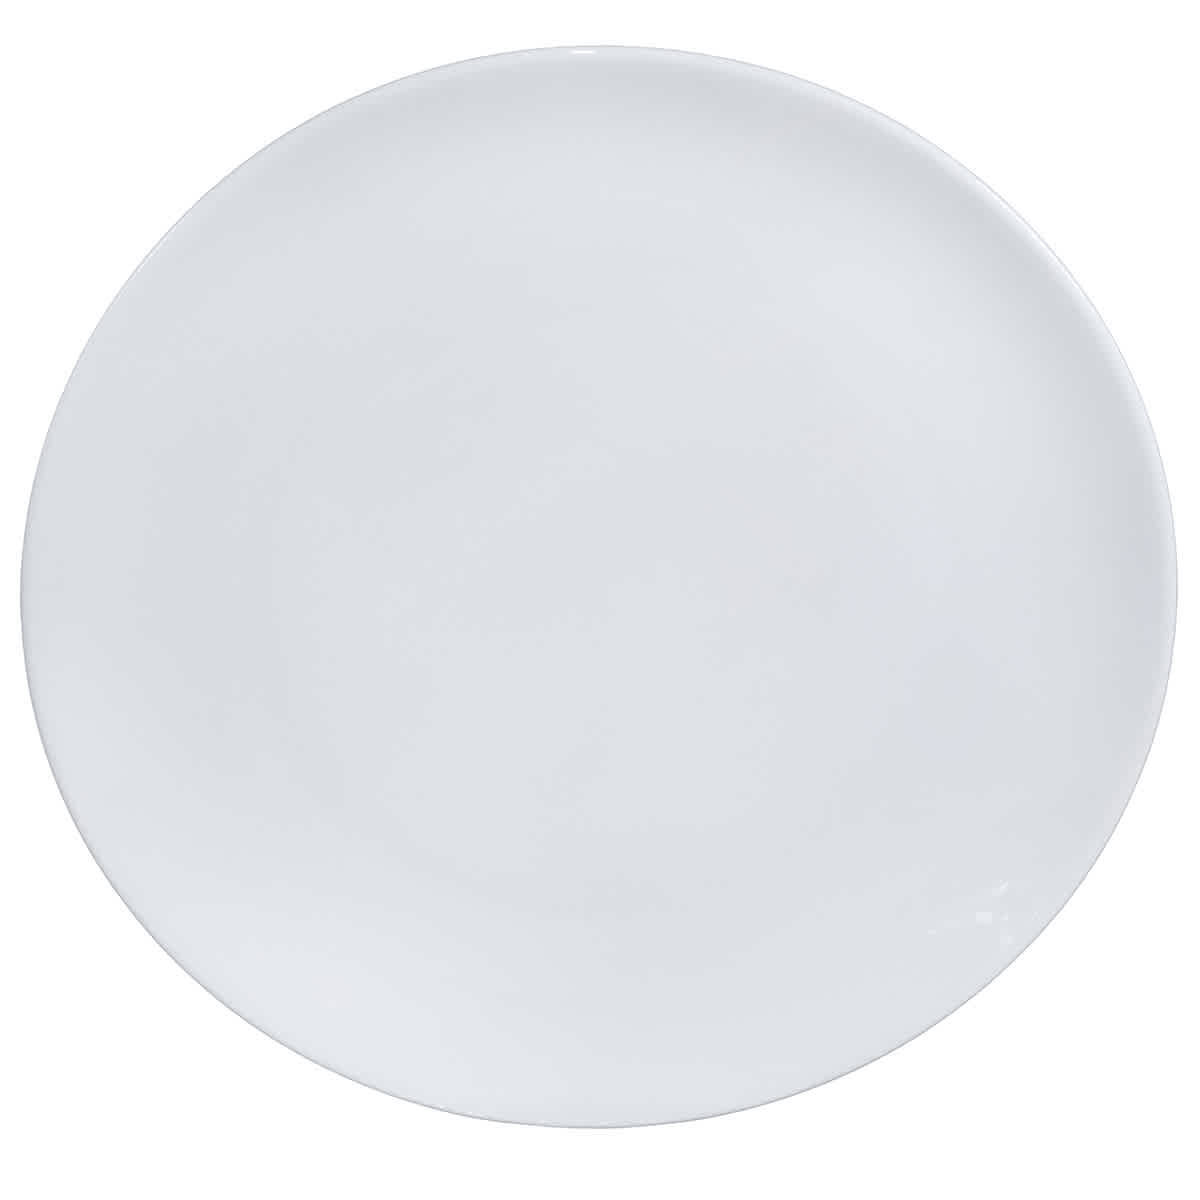 Ginori 1735 Ripr.museo Charger Plate In White